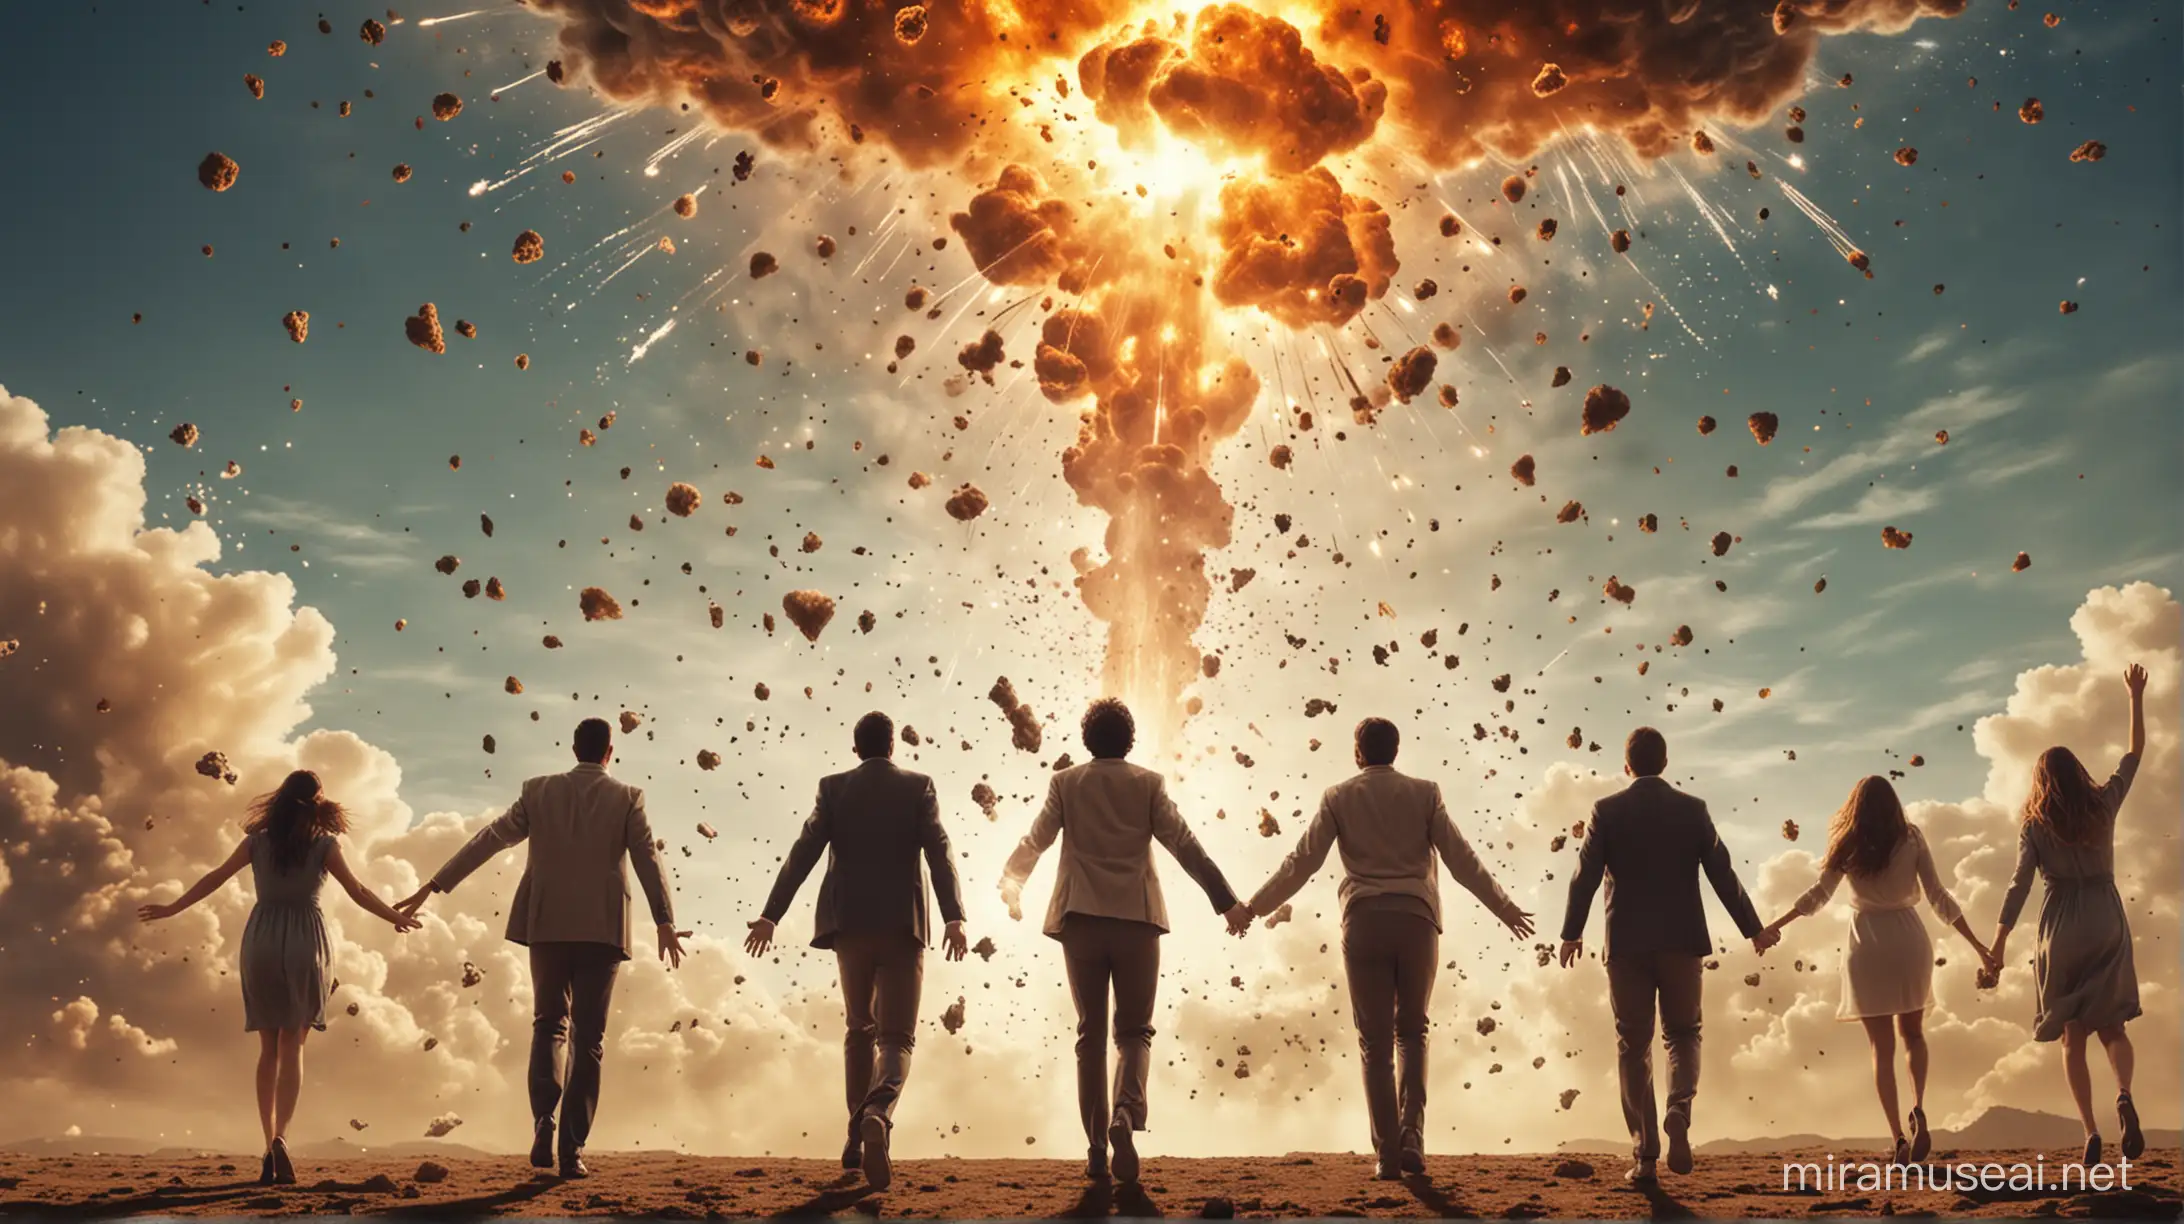 Spectacular Rapture People Ascending Amid Explosions